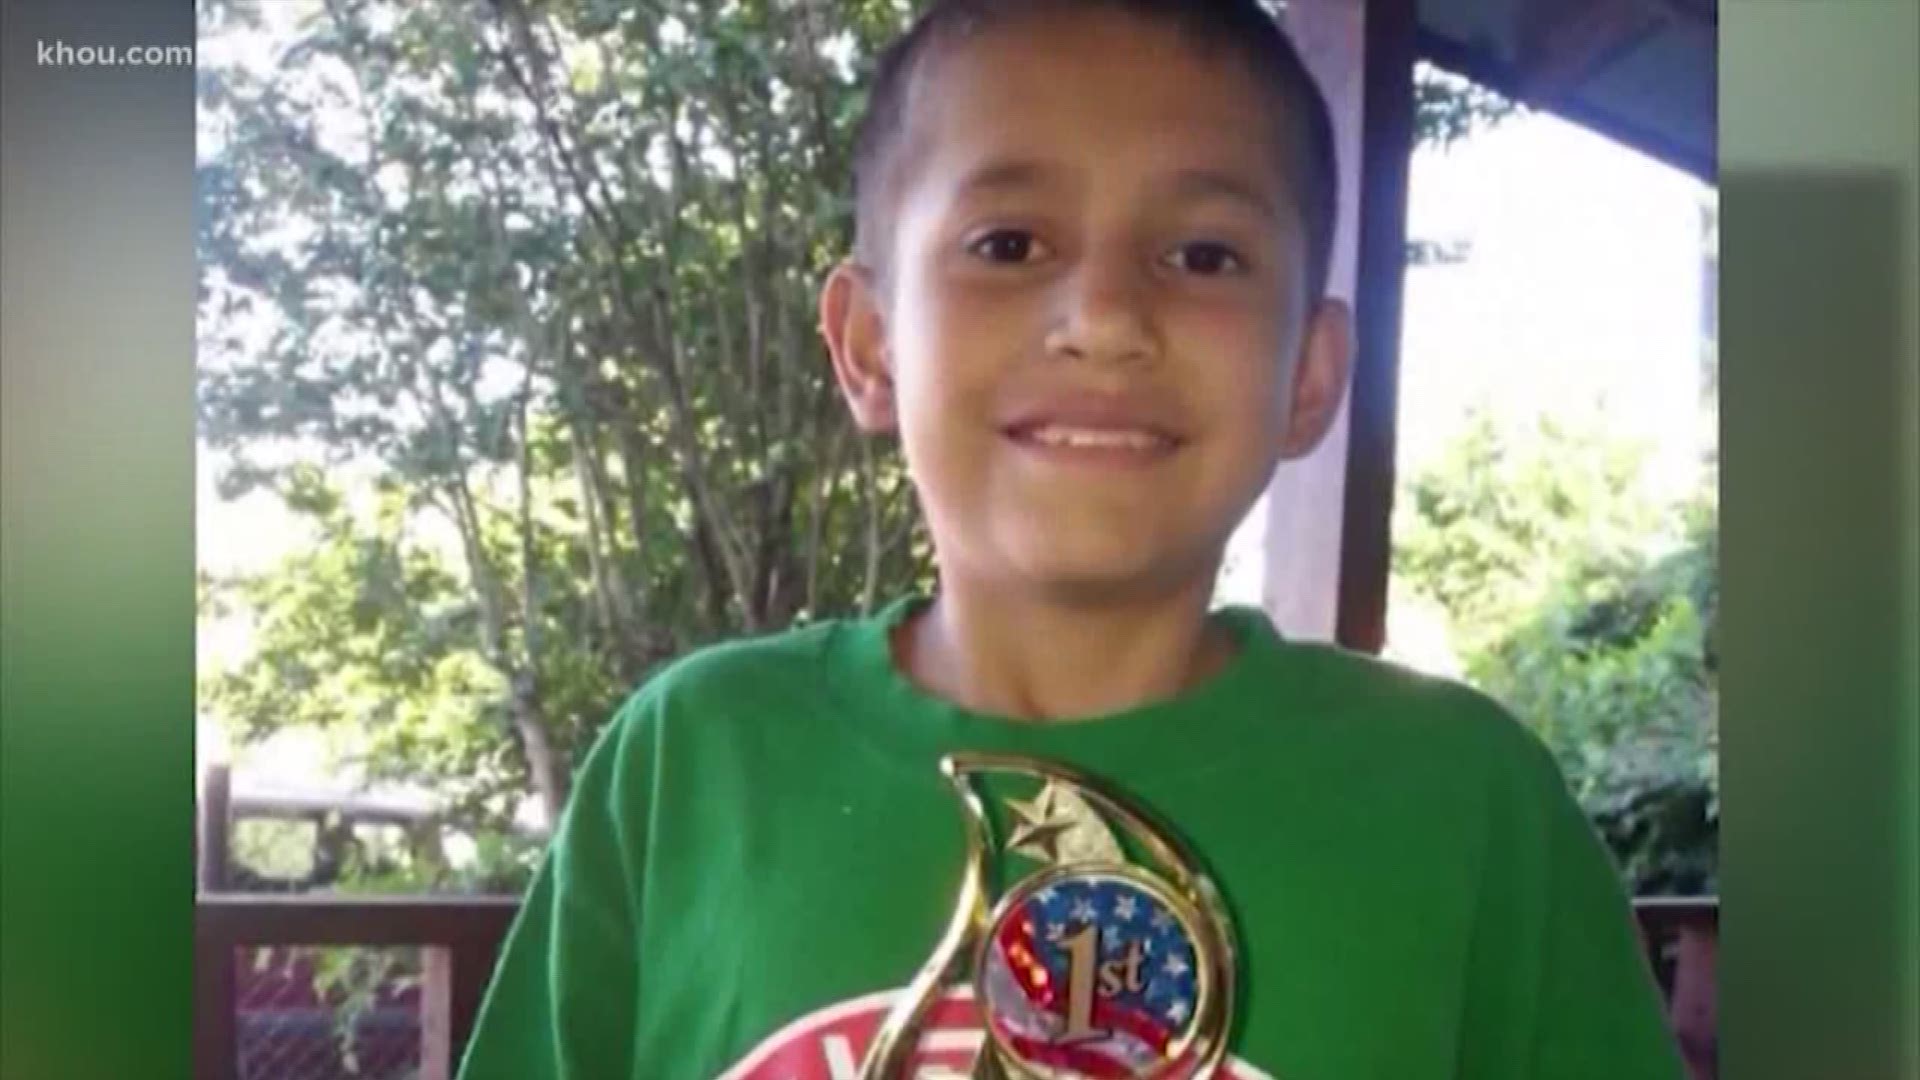 It took more than three years, but police believe they have the man who murdered 11-year-old Josue Flores. Plus, Houston ISD is considering a budget totaling more than $2 billion, but what's not included are teacher pay raises.